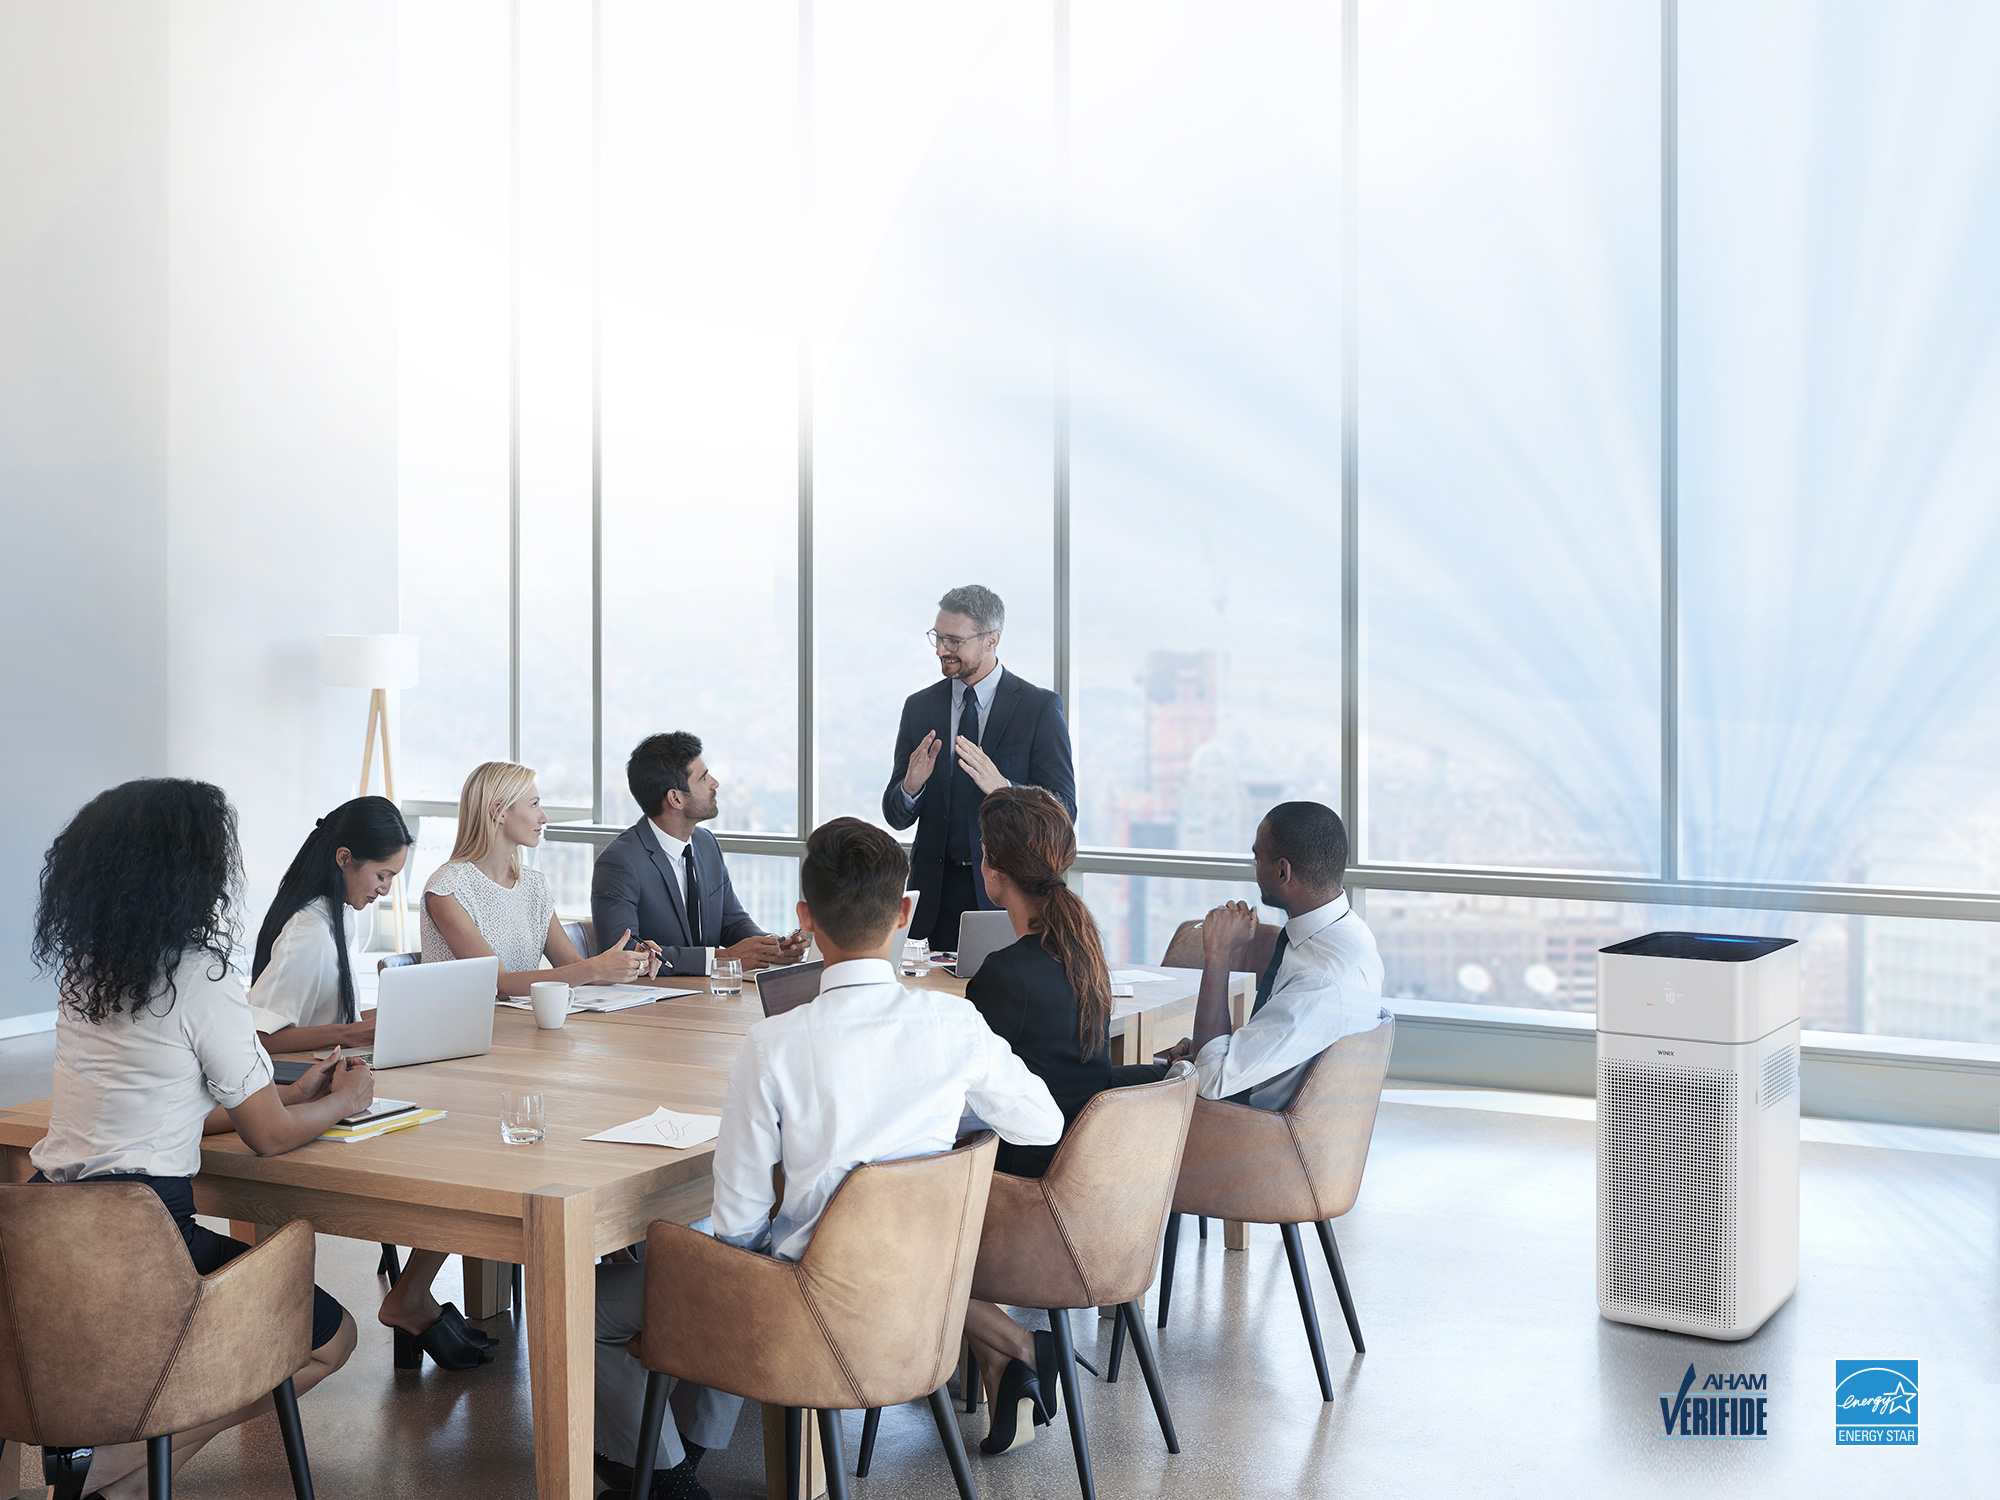 XQ air purifier in an office meeting setting with AHAM verified logo and energy star logo in bottom corner of image